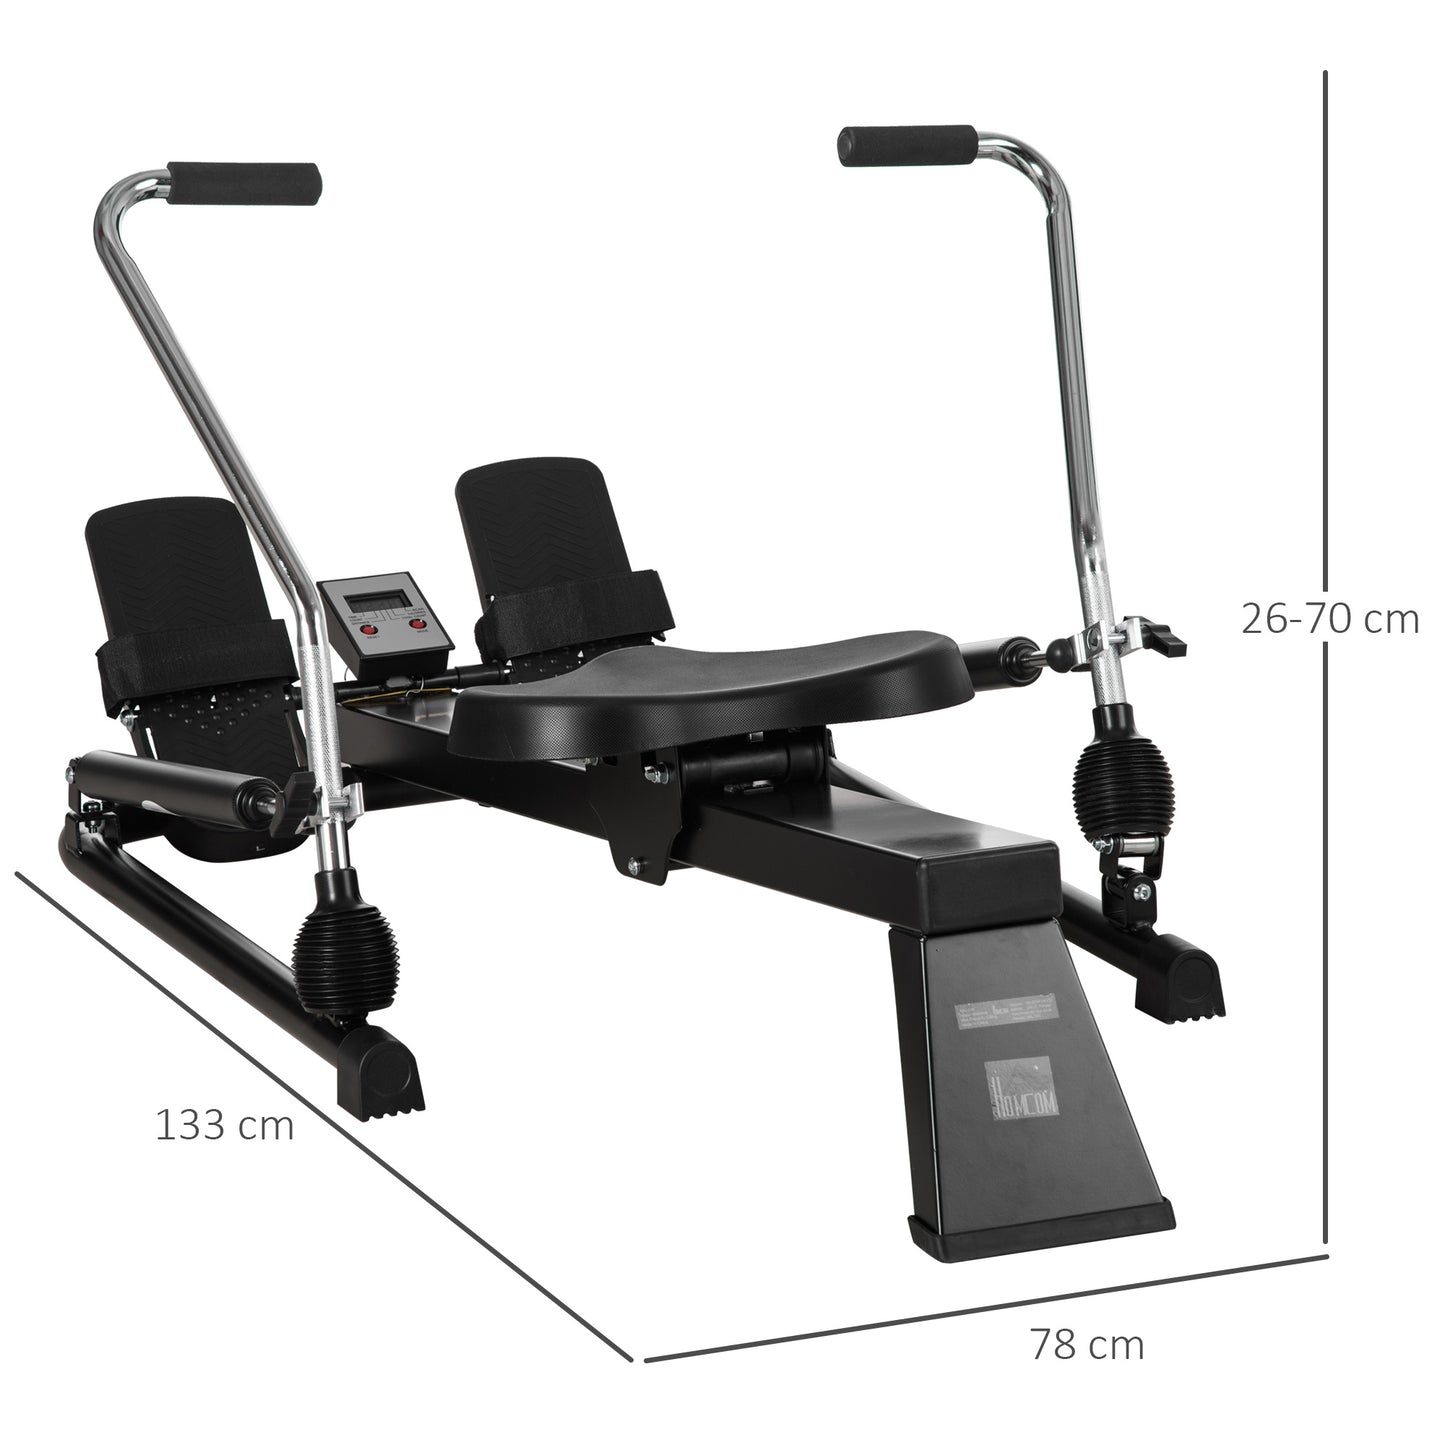 HOMCOM Rowing Machine, Rower with Adjustable Resistances and Digital Monitor for Home, Office, Gym